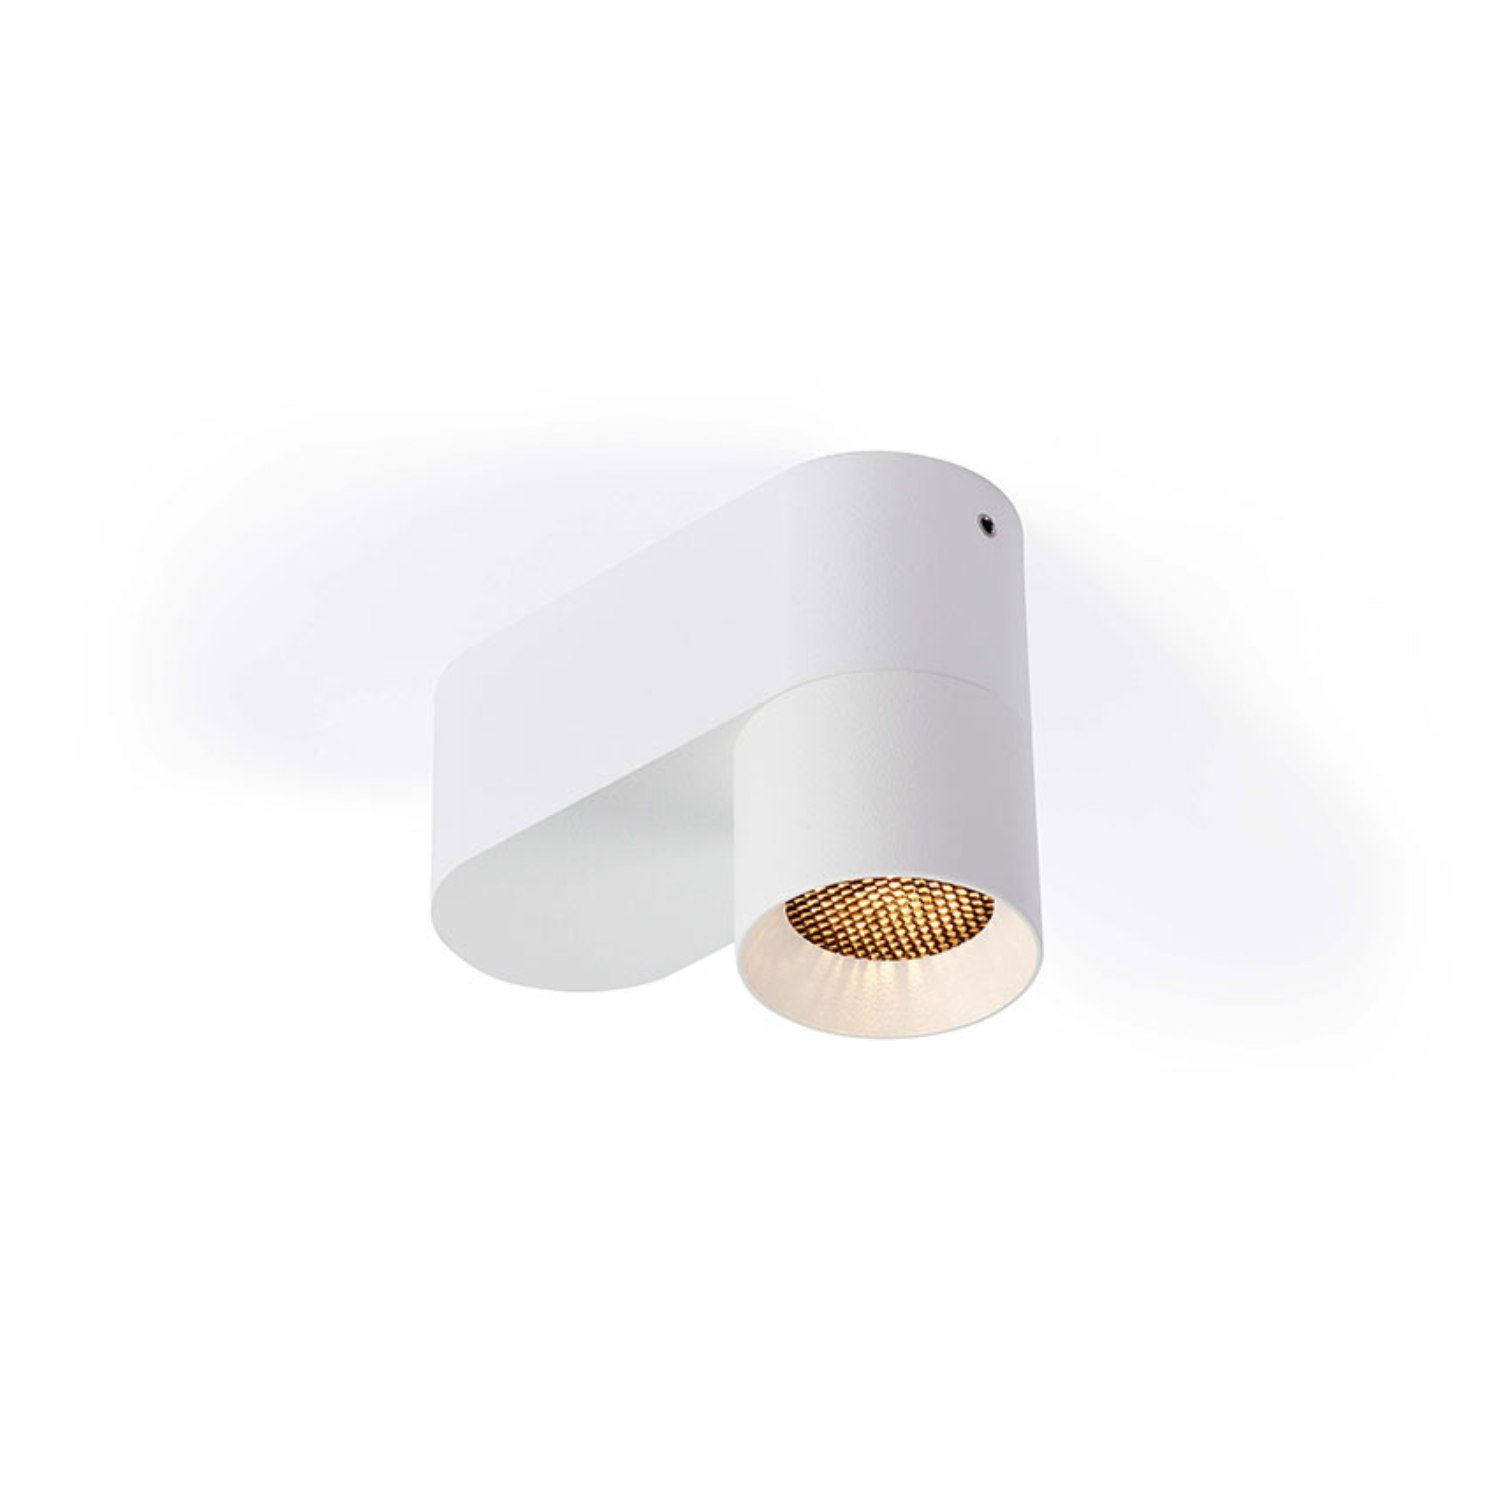 AUDY-1 UP - Ceiling Light